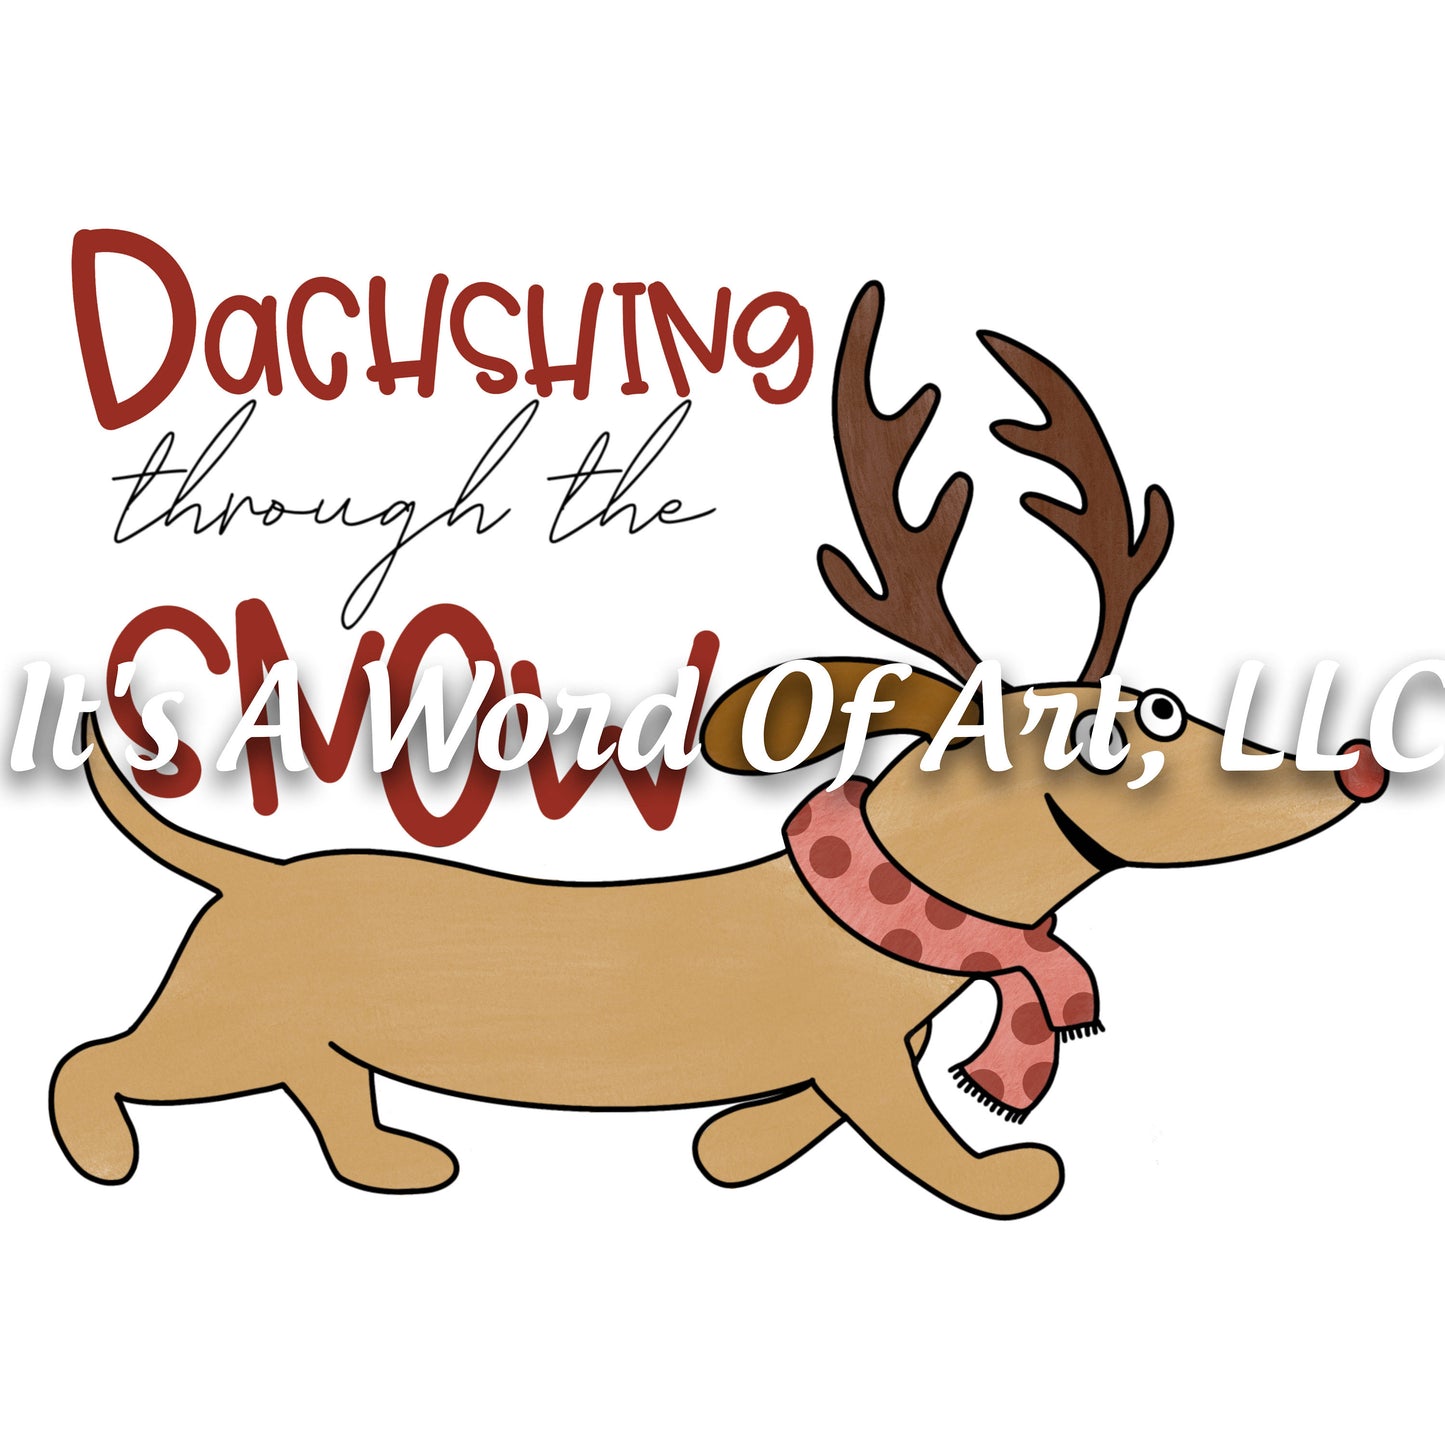 Christmas 319 - Christmas Dachshing Through The Snow Dachshund - Sublimation Transfer Set/Ready To Press Sublimation Transfer